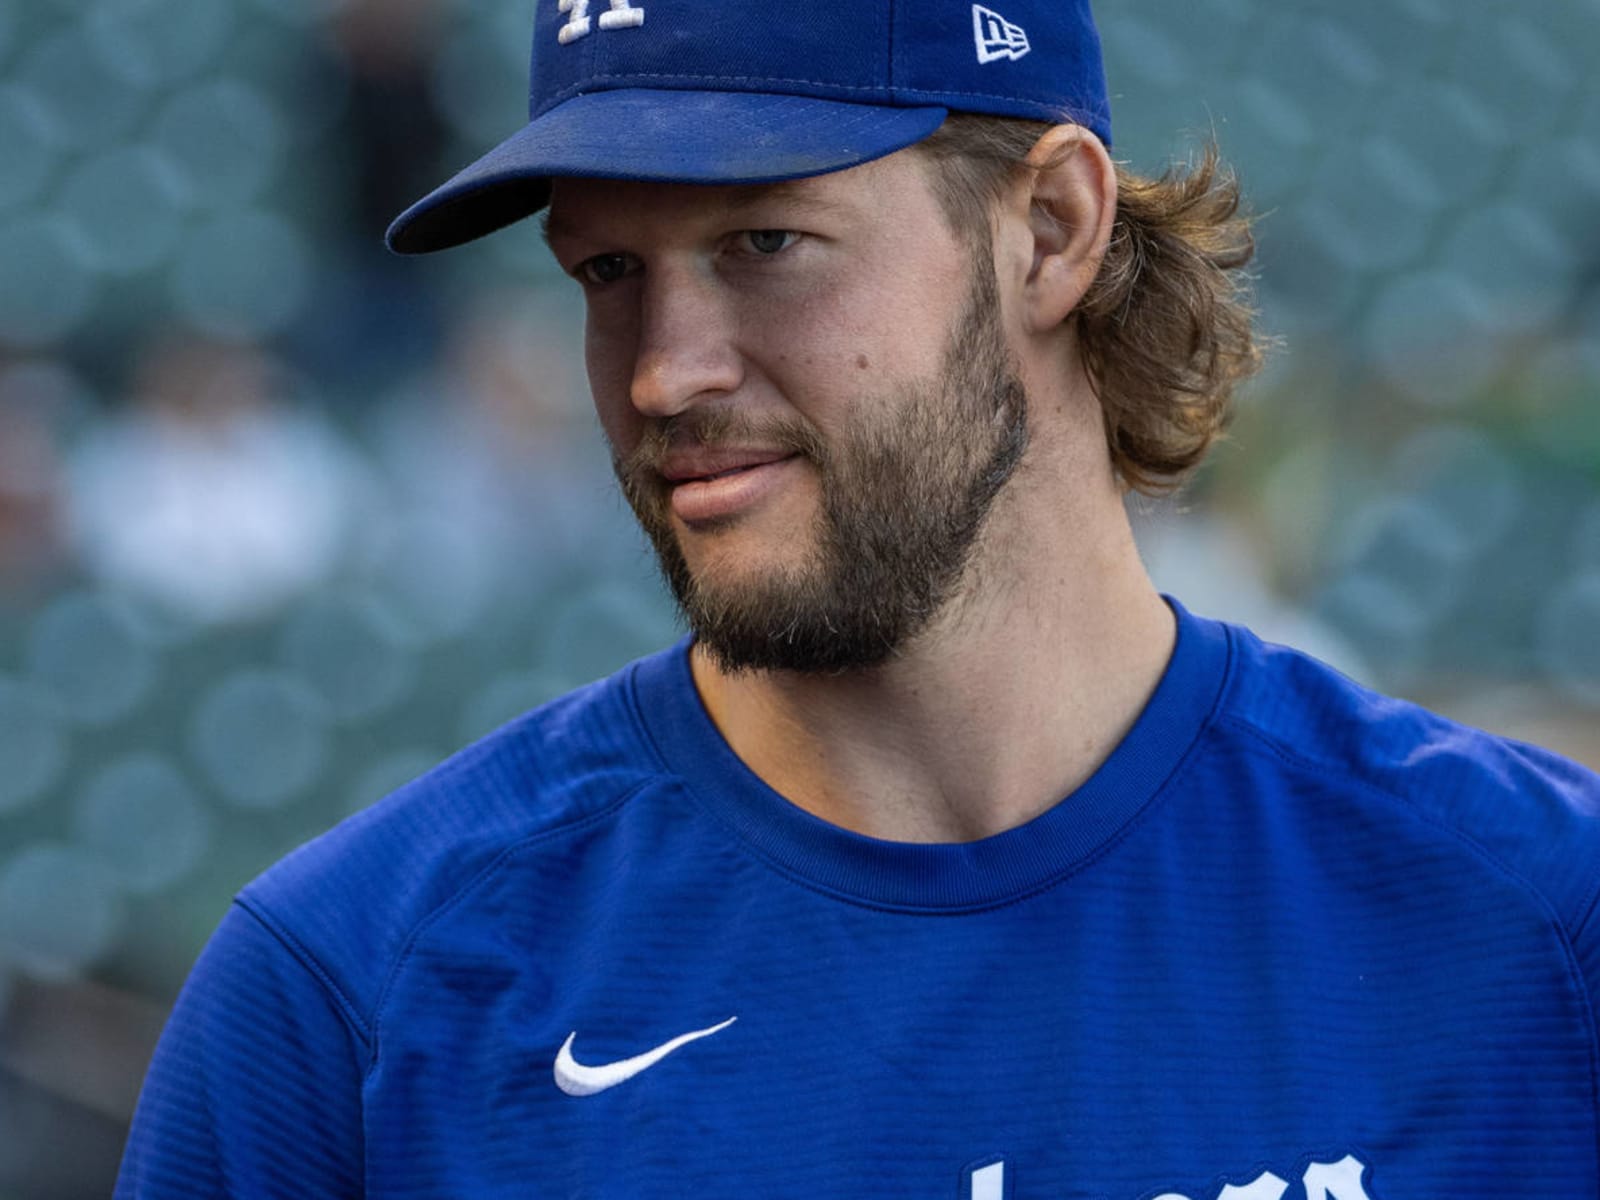 Clayton Kershaw doesn't receive qualifying offer from Dodgers